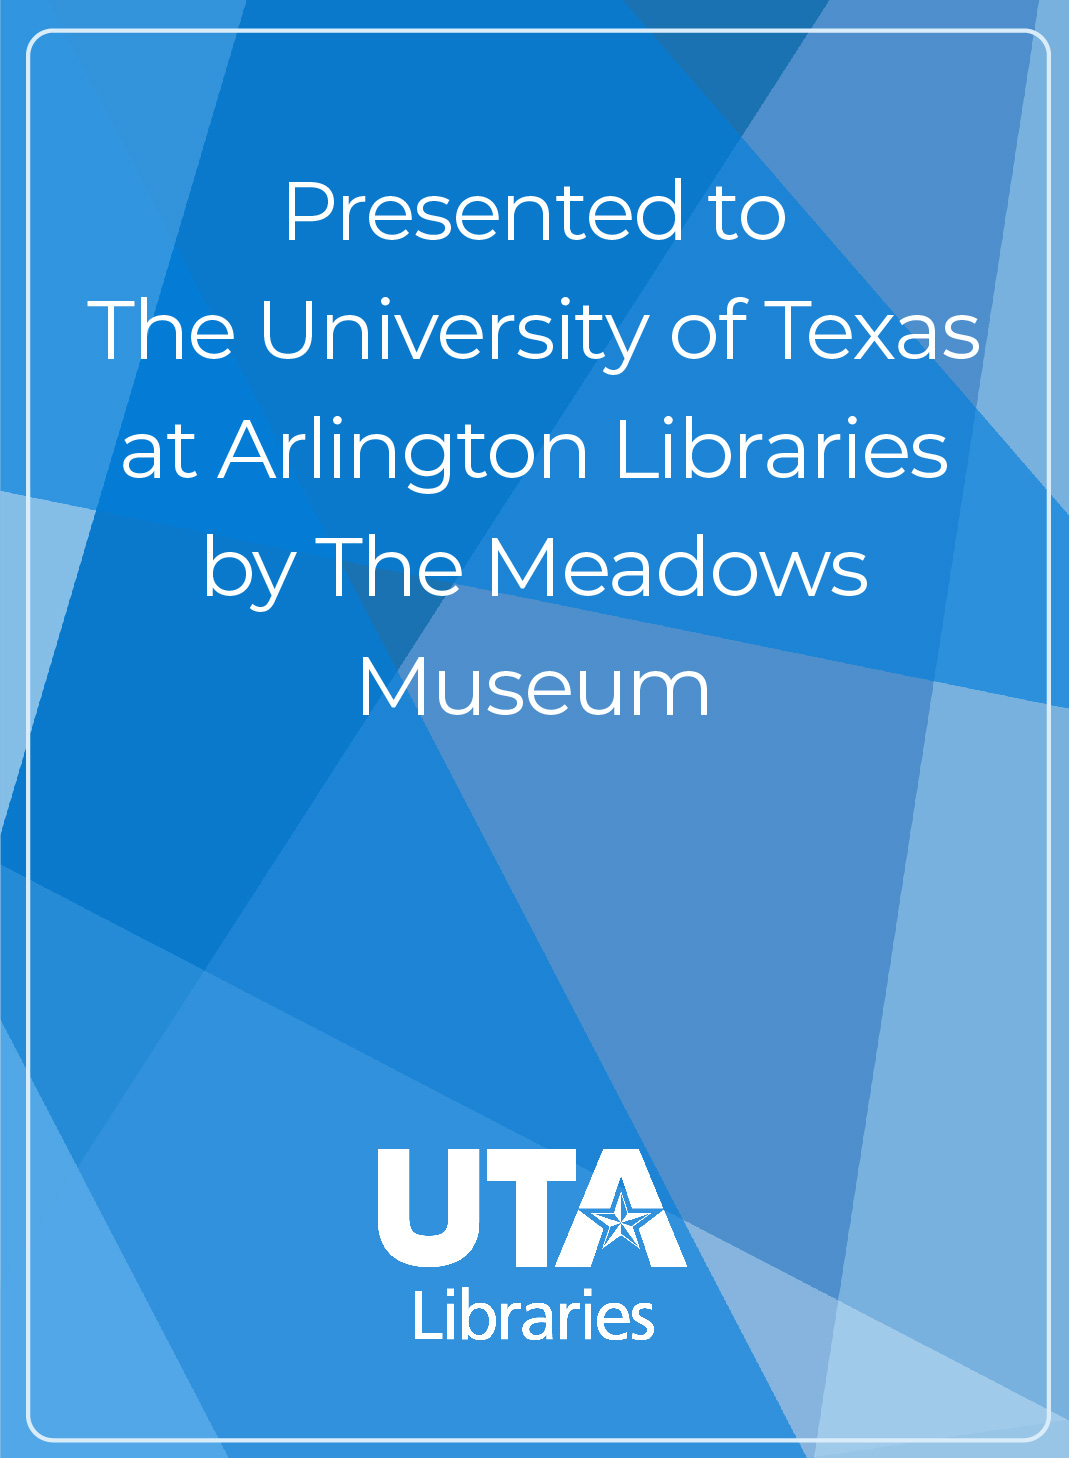 Presented to the University of Texas at Arlington Libraries by The Meadows Museum